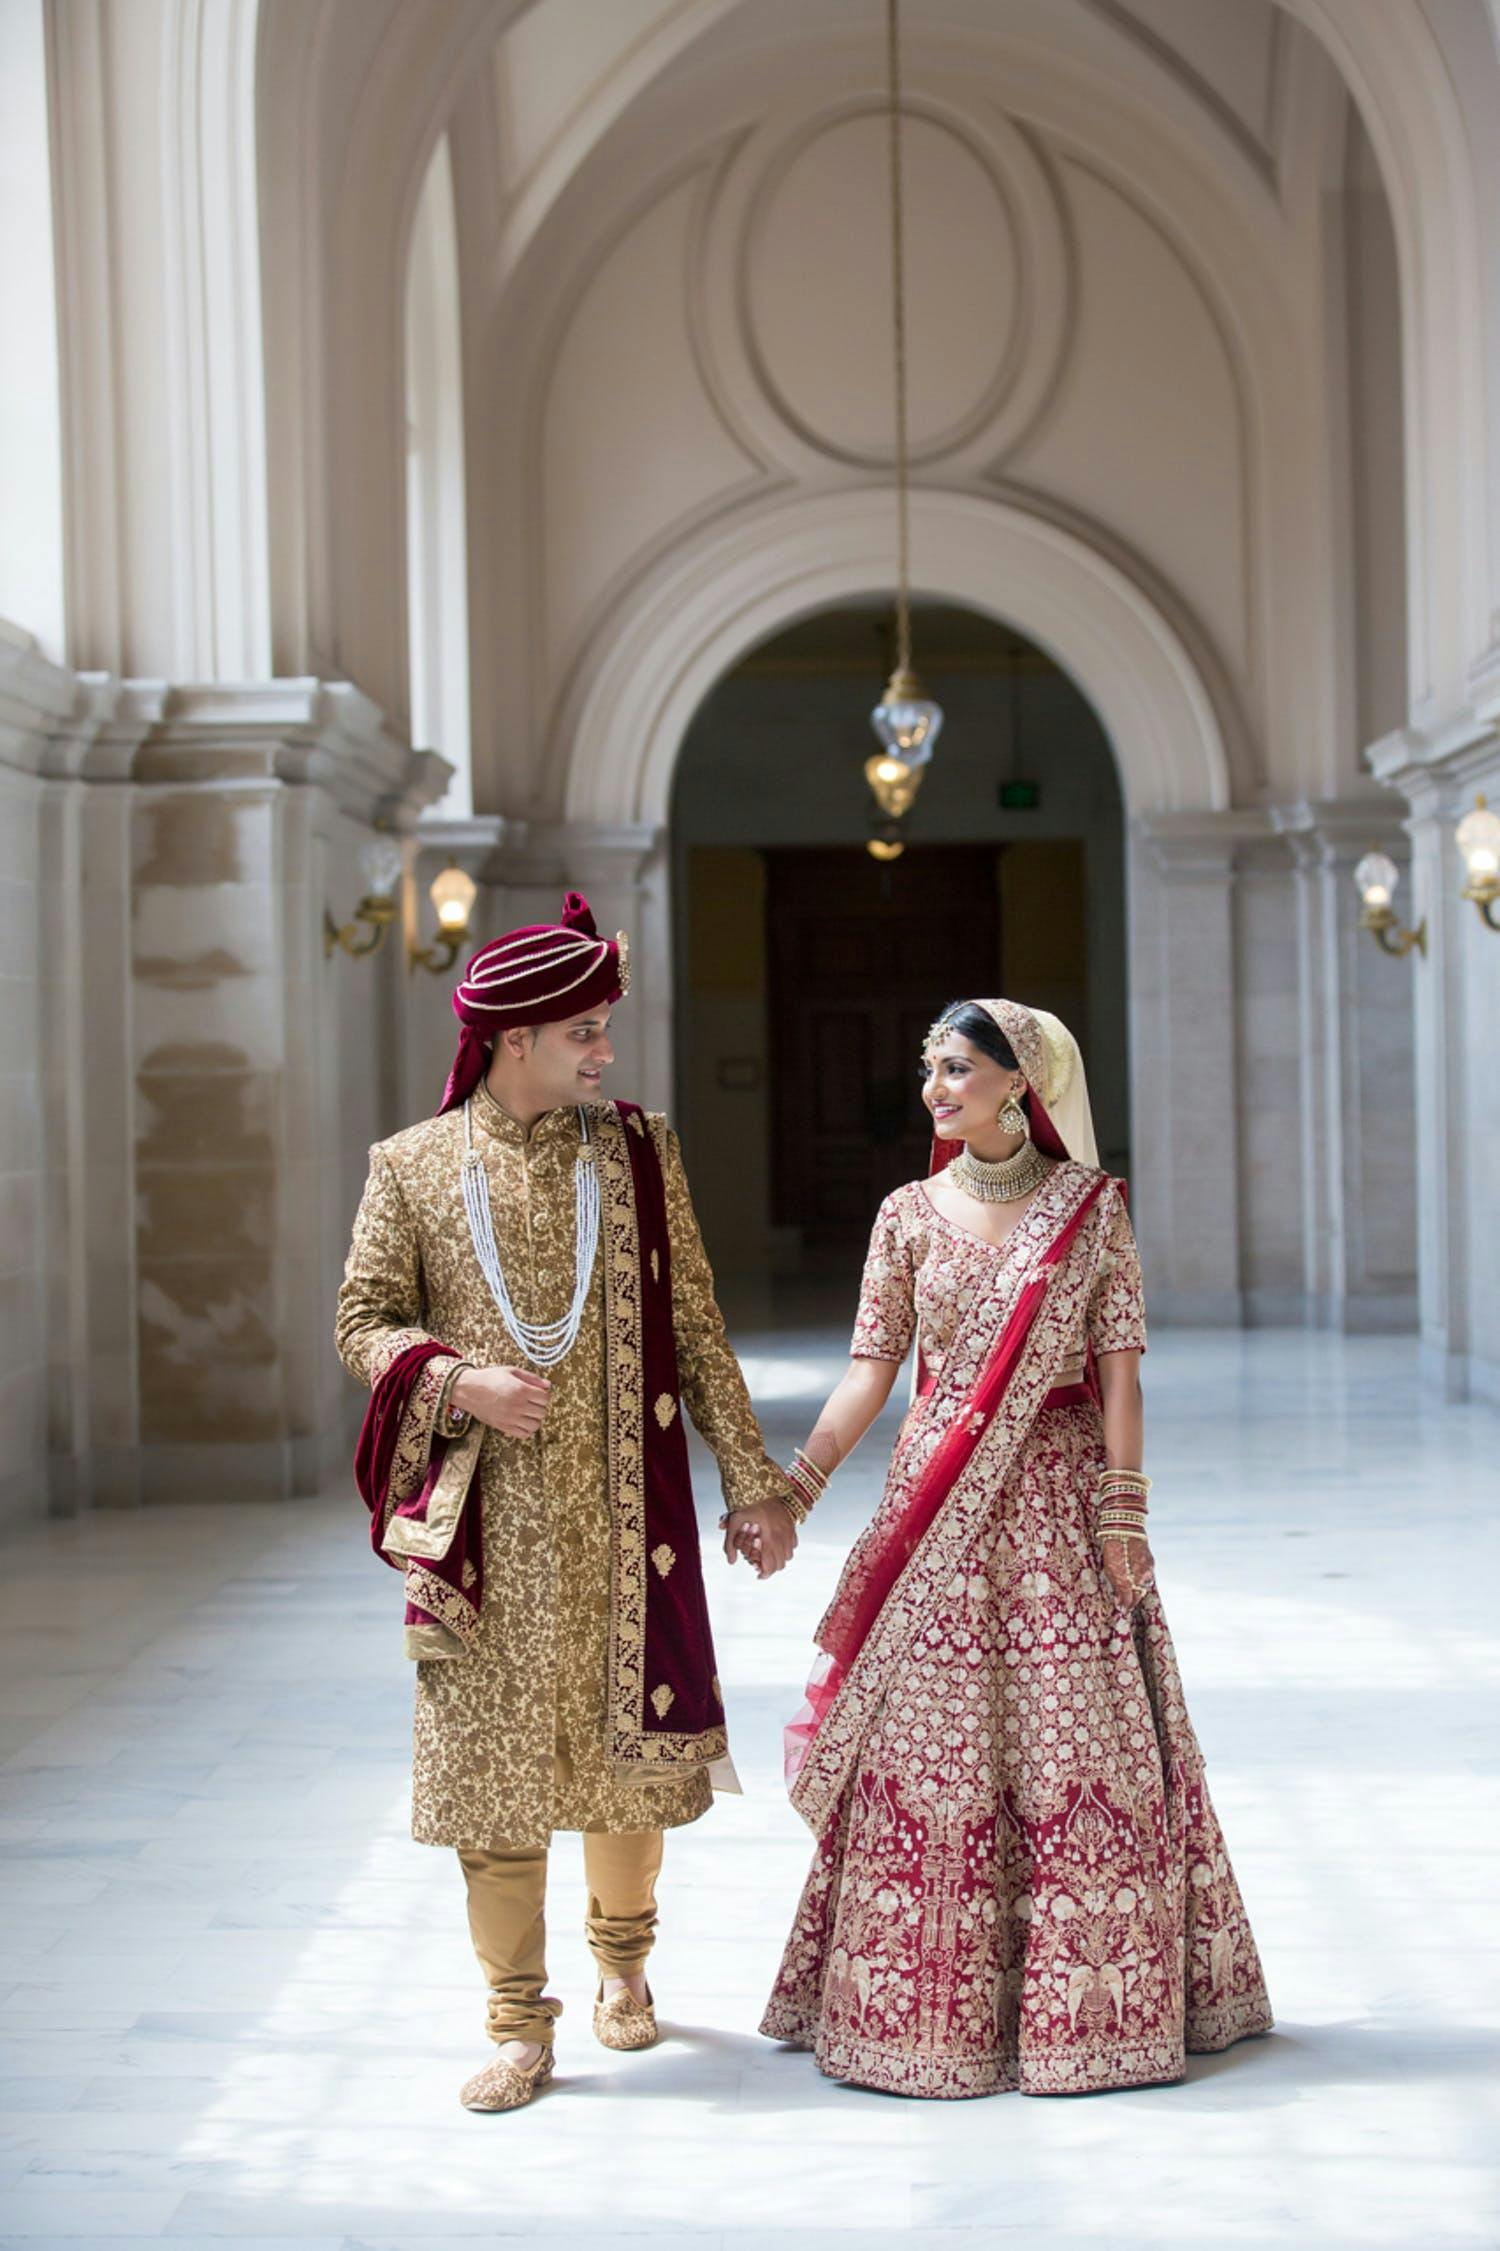 Bride and Groom Walk Down Vaulted Hallway at South Asian Wedding | PartySlate